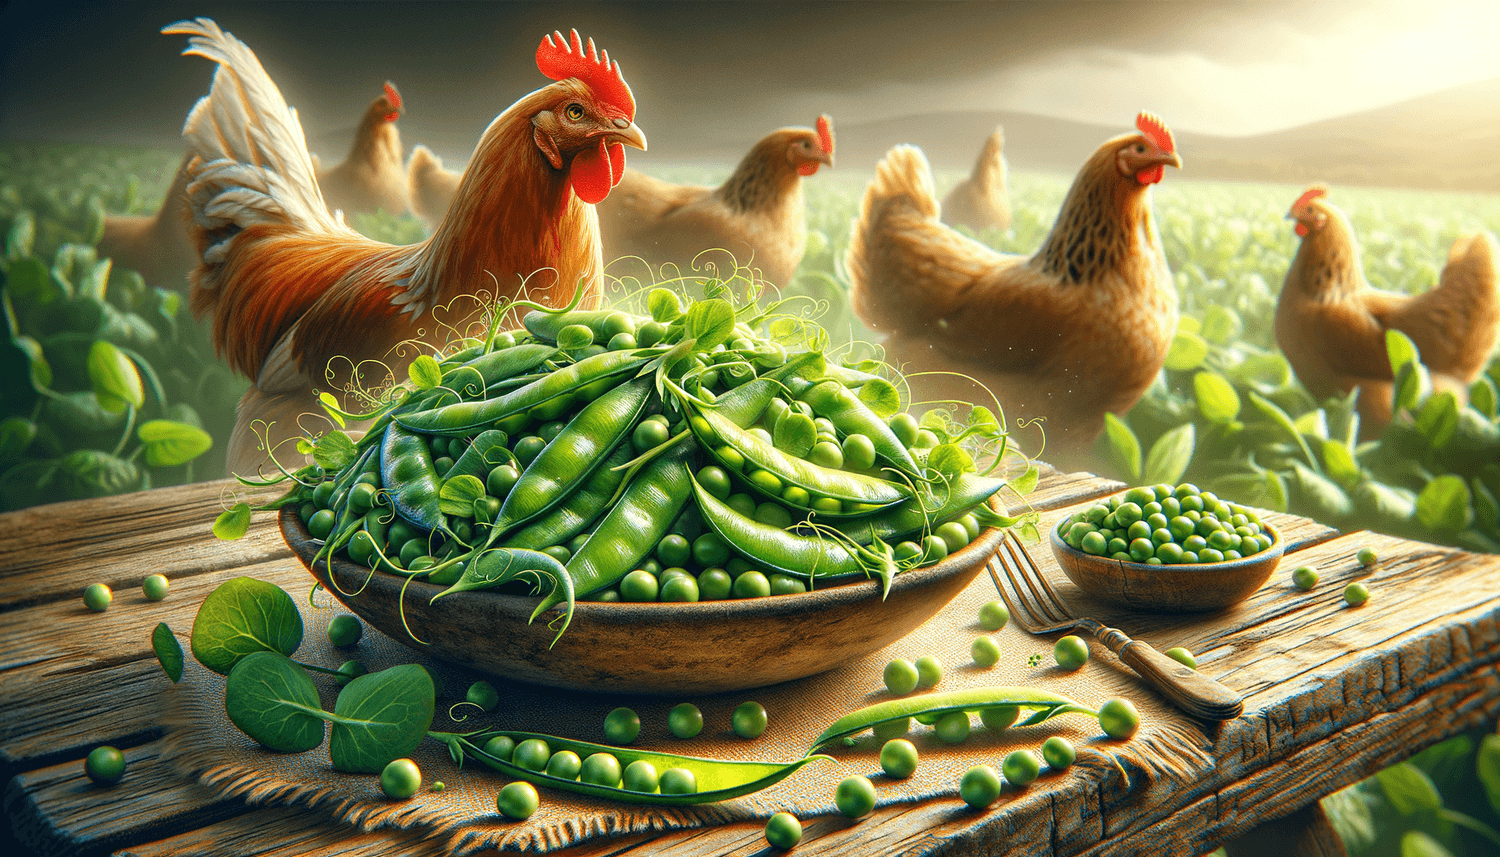 Can Chickens Eat Pea Shoots?